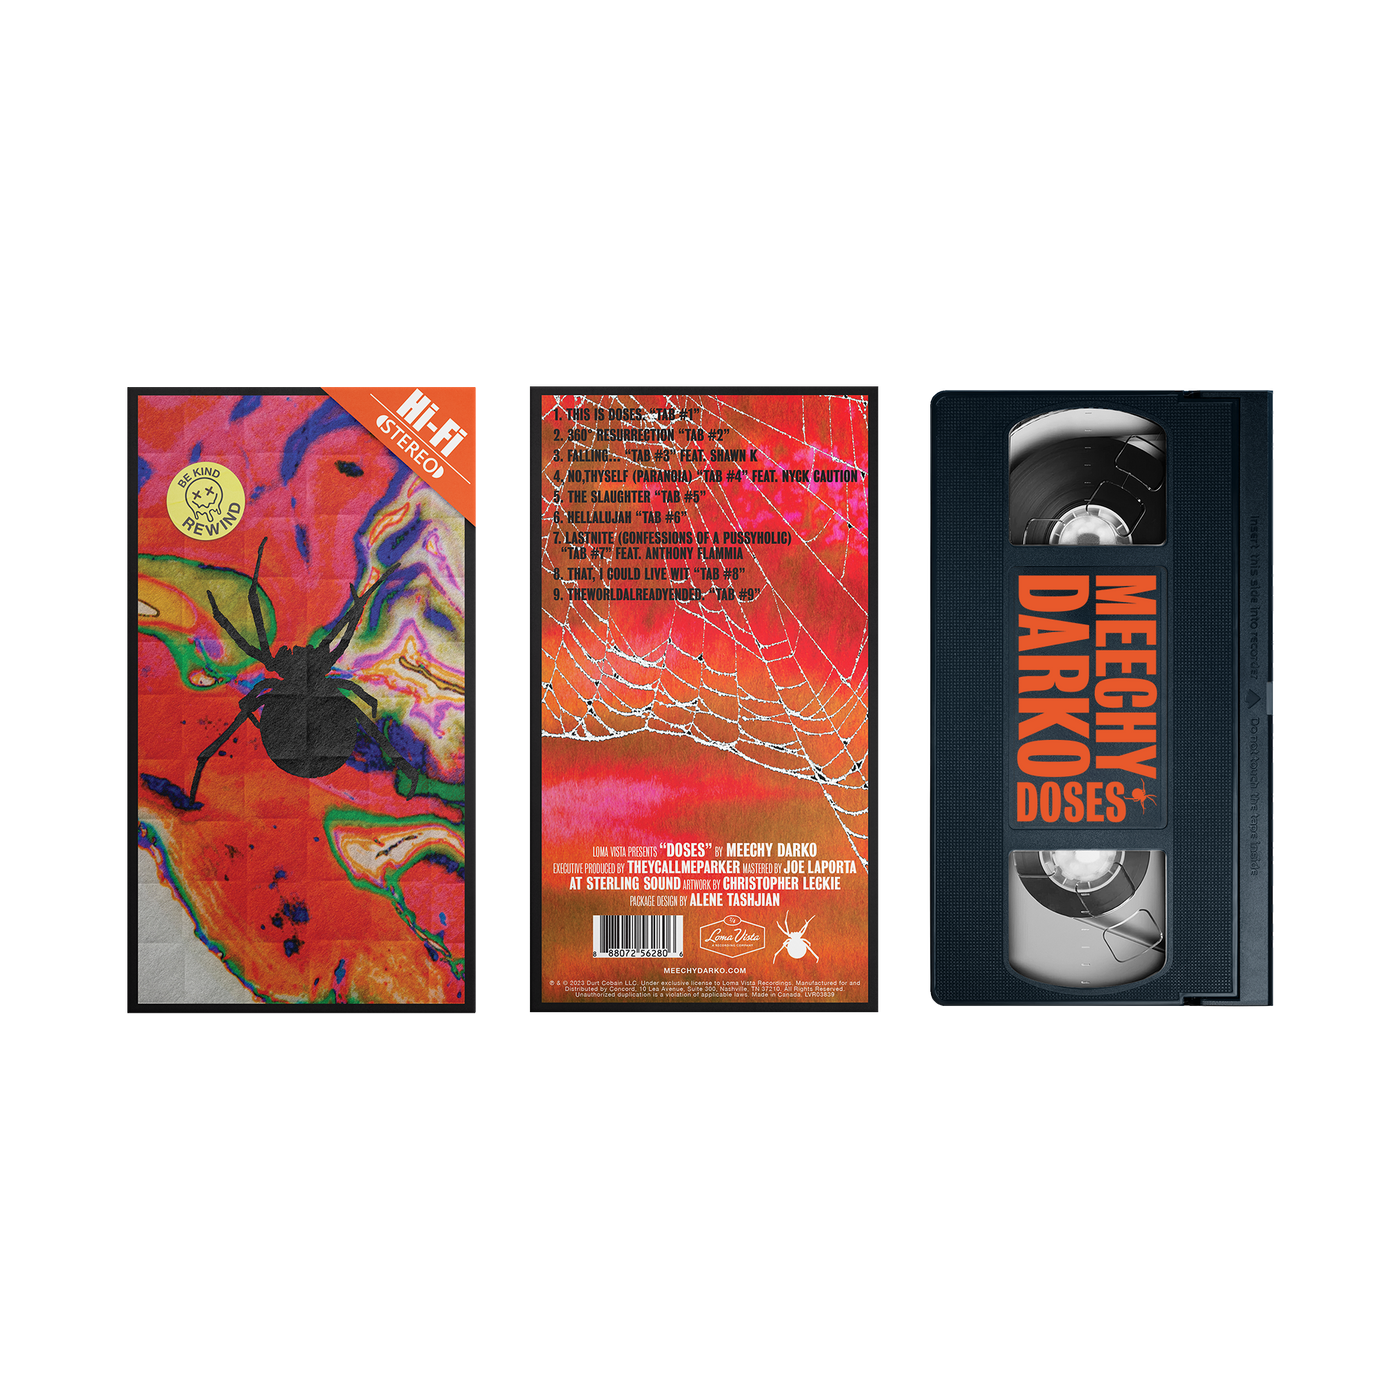 DOSES VHS (Limited Edition of 100)